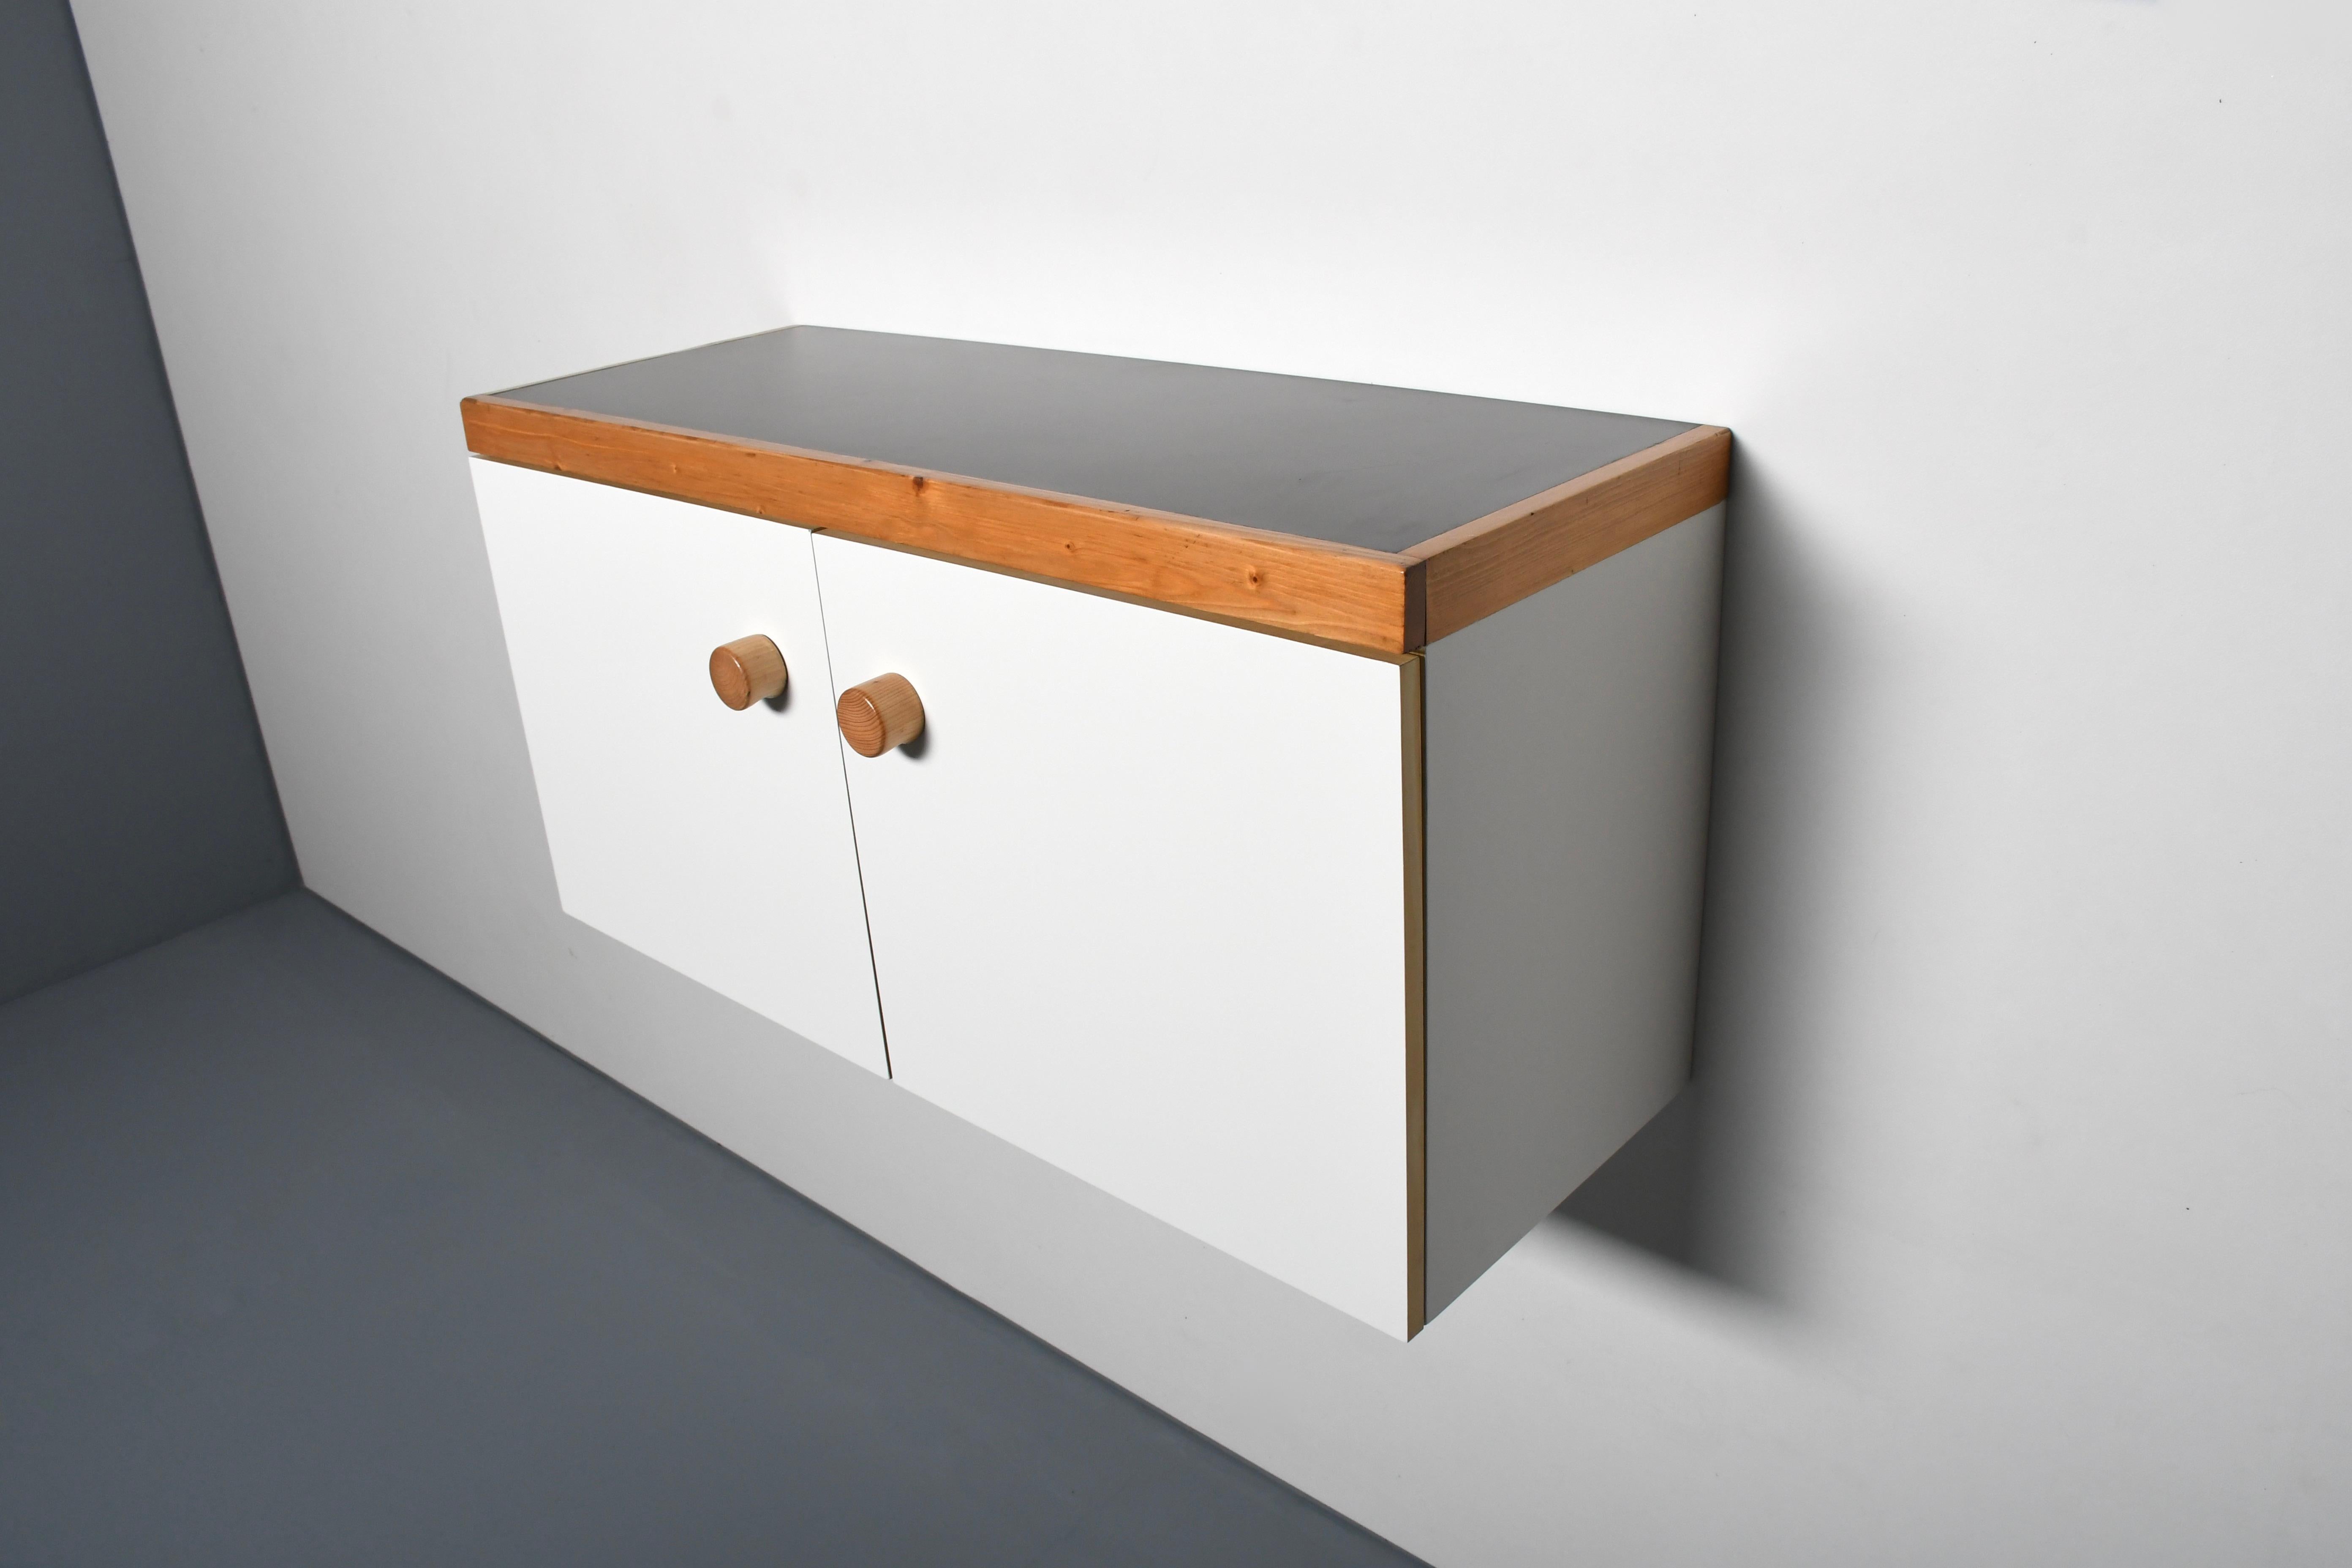 Laminate Wall Mounted 'Les Arcs’ Cabinet / Sideboard by Charlotte Perriand, France 1970s For Sale